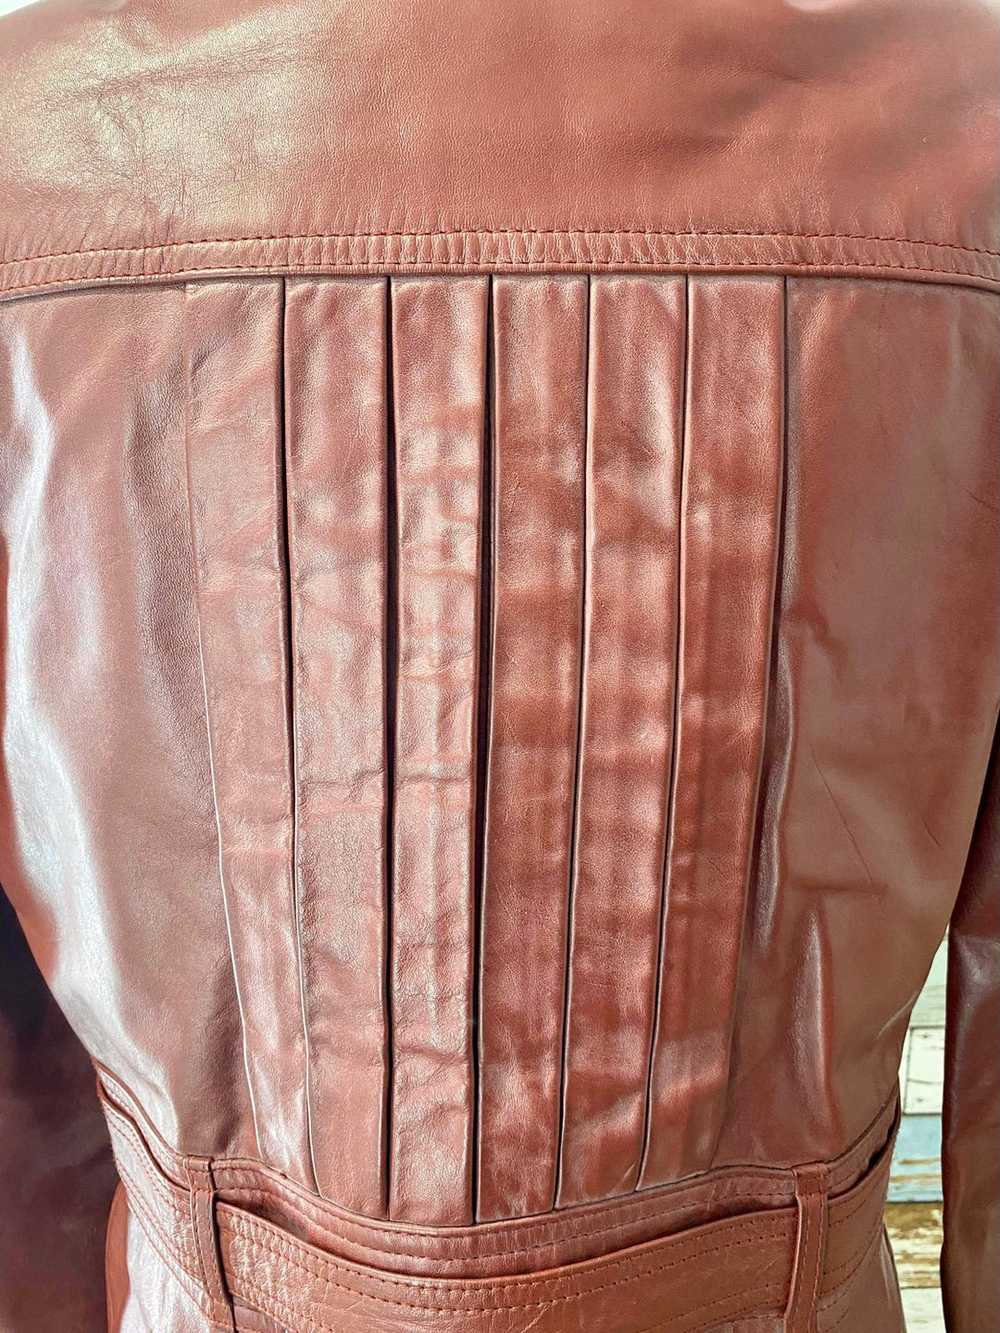 70s Red Leather Trench Coat - image 5